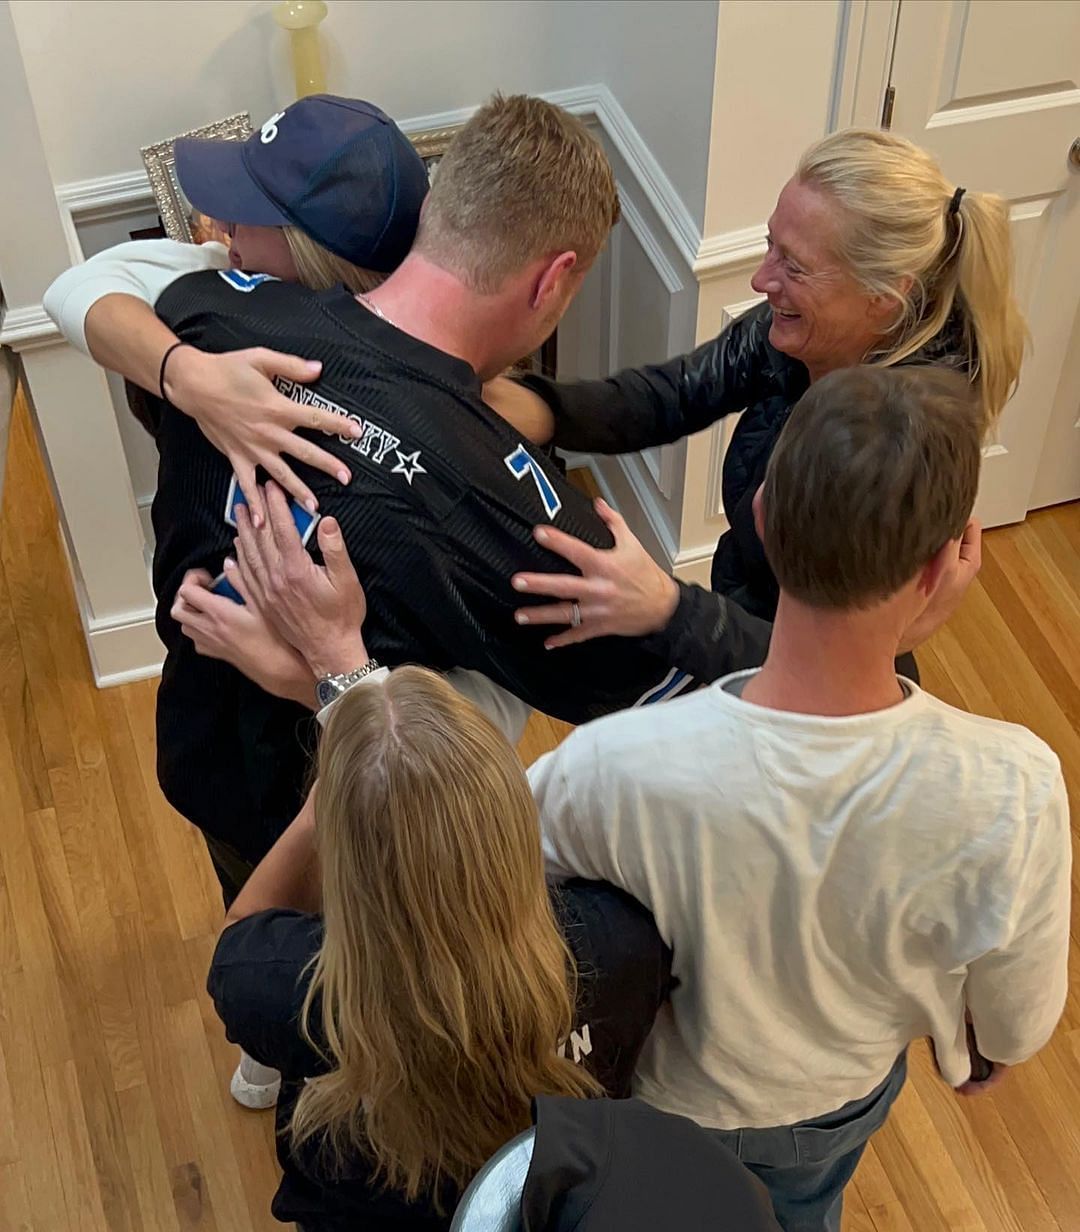 The Levis family celebrates after Will Levis was drafted by the Tennessee Titans (Image credit: Instagram.com/kelleylevis)